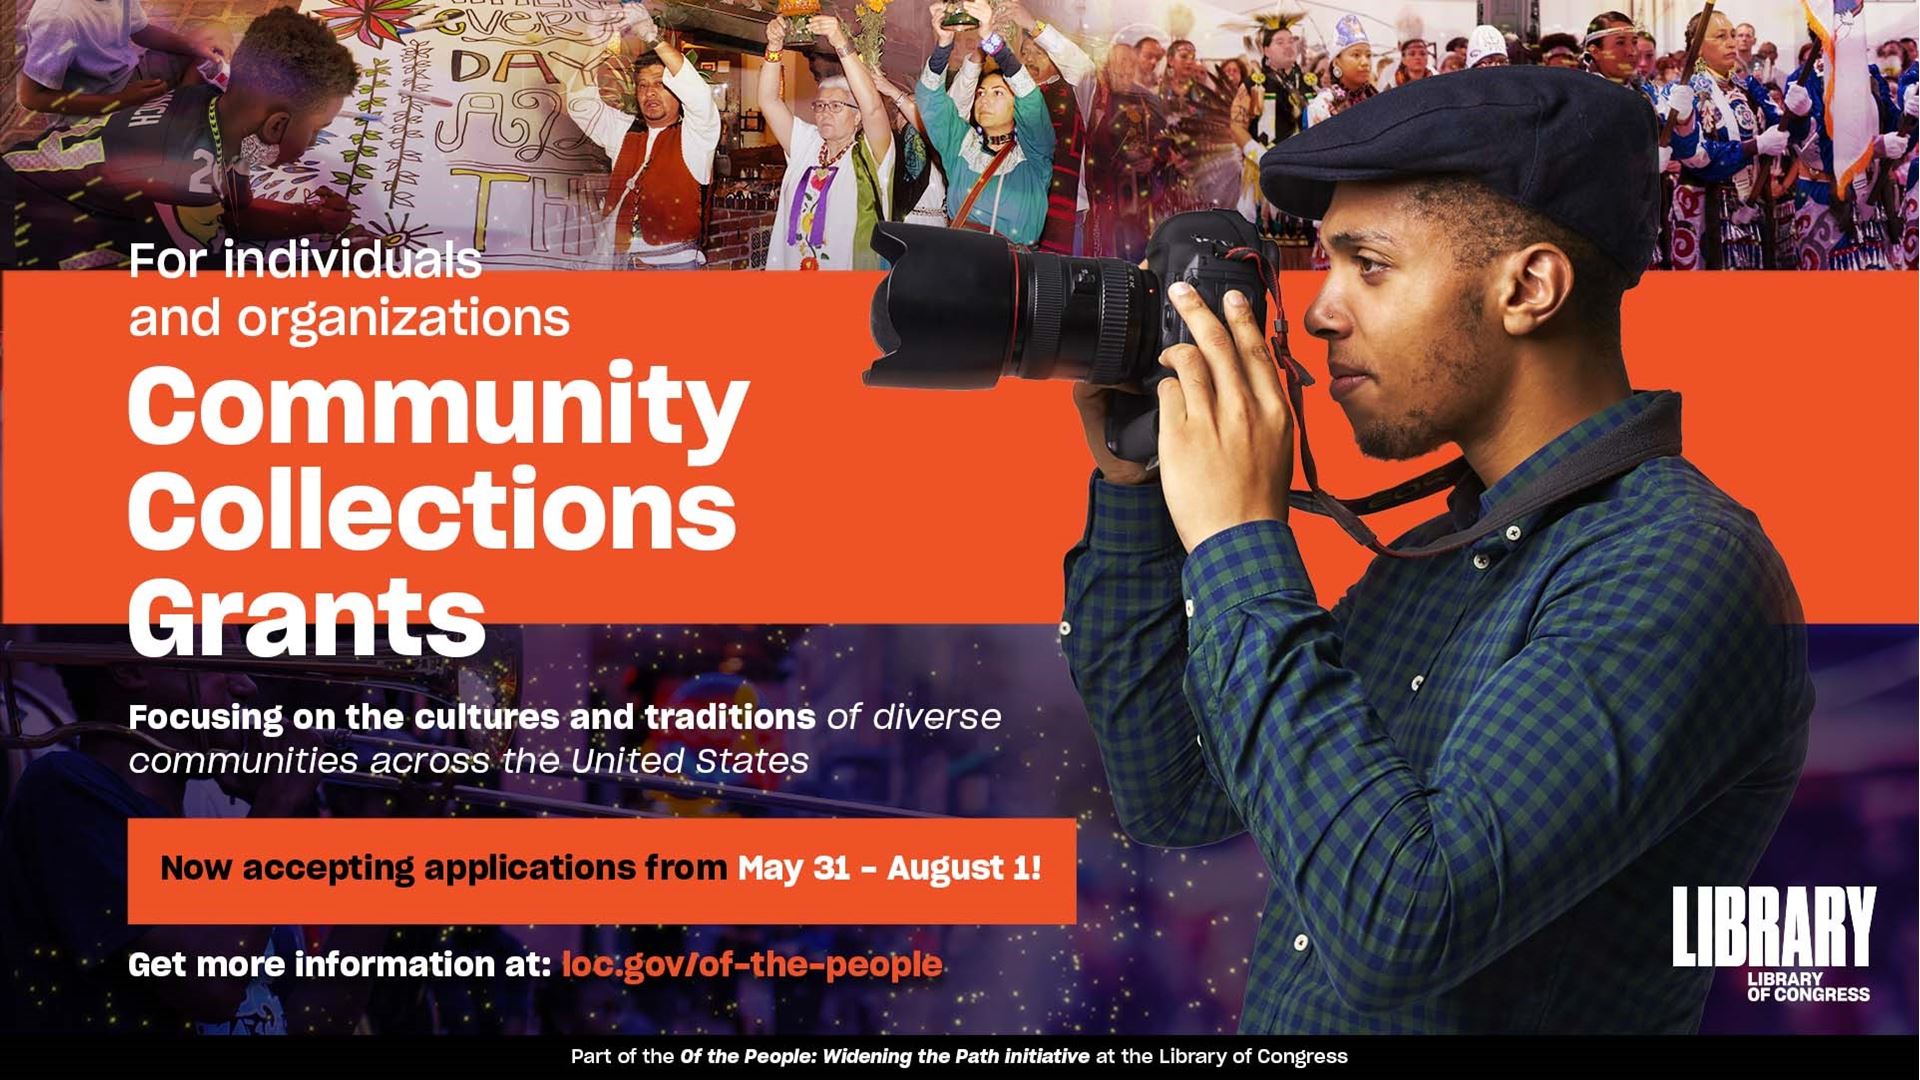 Library of Congress Offers Second Round of Grant Funding to Support Contemporary Cultural Field Research within Diverse Communities